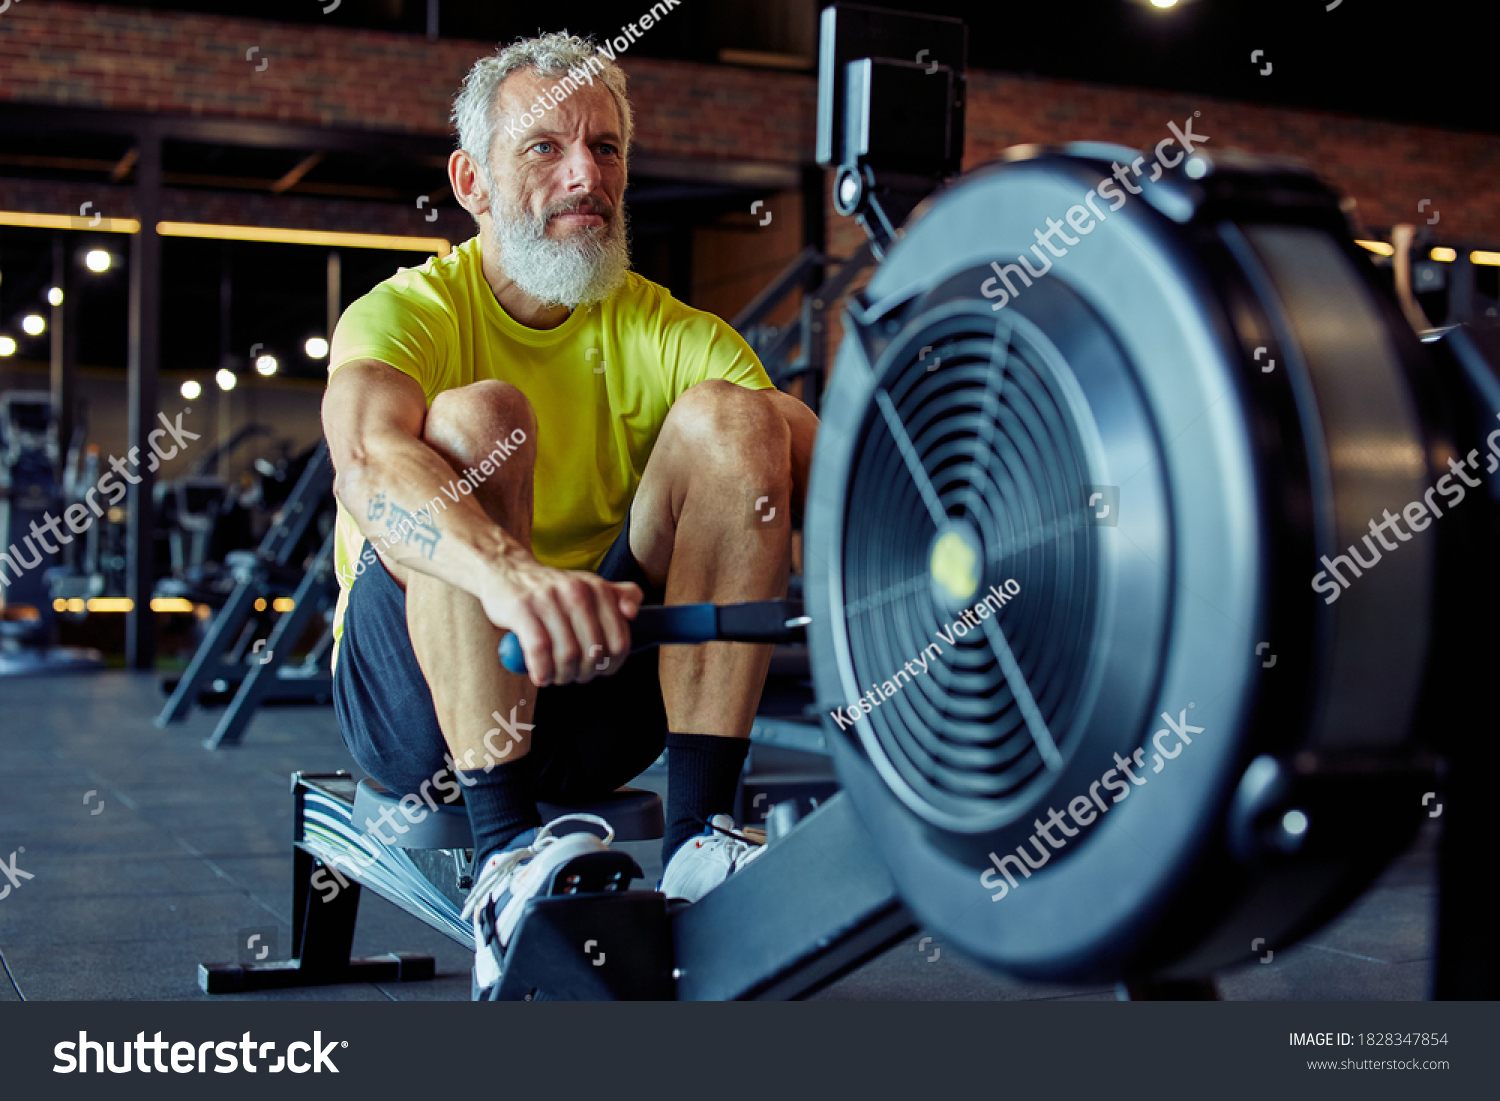 Sport and fitness after 50. Strong mature athletic man in sportswear exercising on rowing machine at gym #1828347854